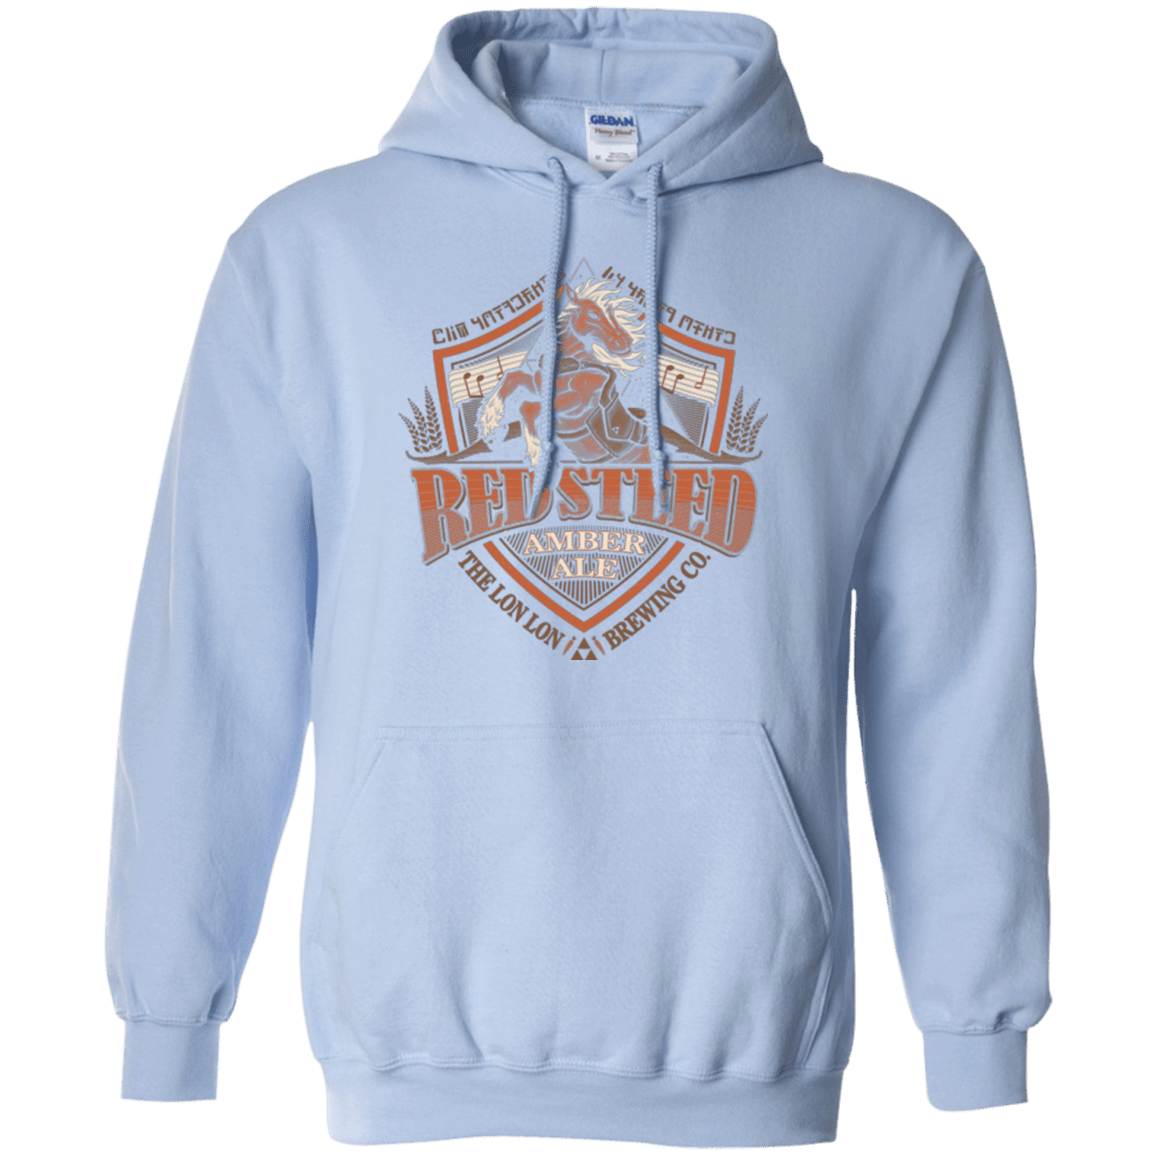 Sweatshirts Light Blue / Small Red Steed Amber Ale Pullover Hoodie